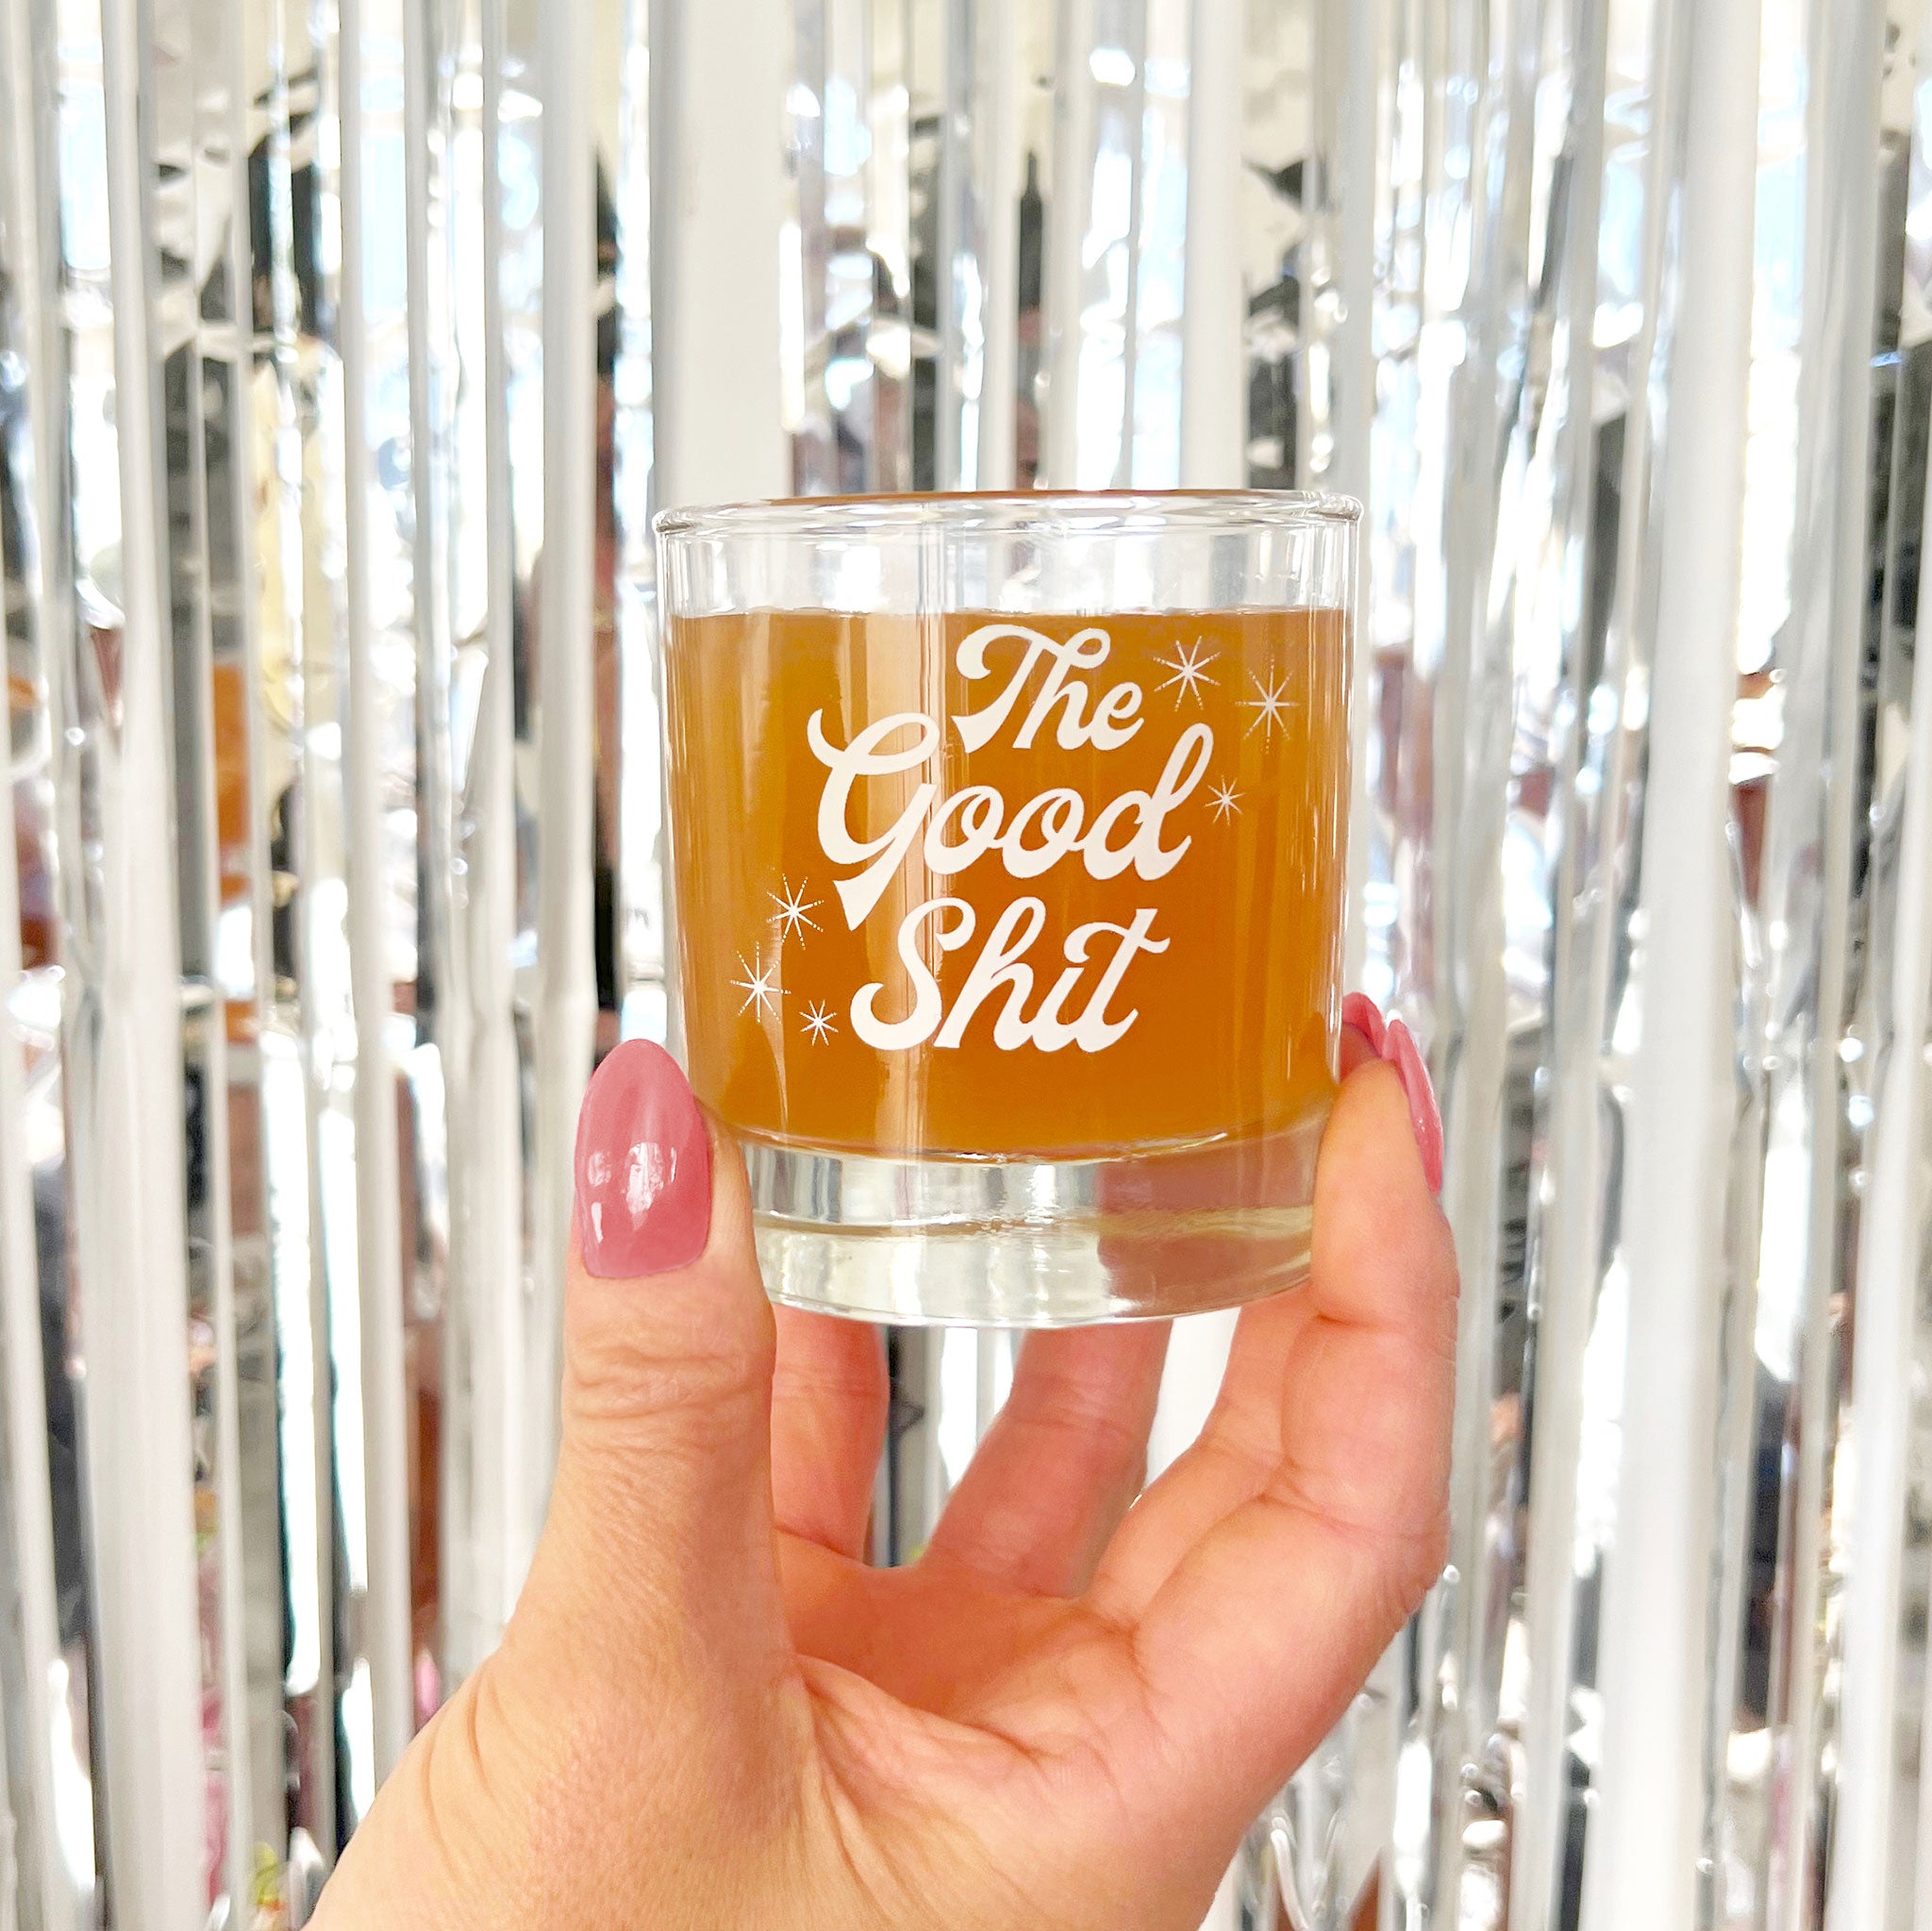 Against a silver tinsel backdrop is a photograph of a short glass tumbler with a thick bottom and "The Good Shit" printed across the center in white groovy cursive text.